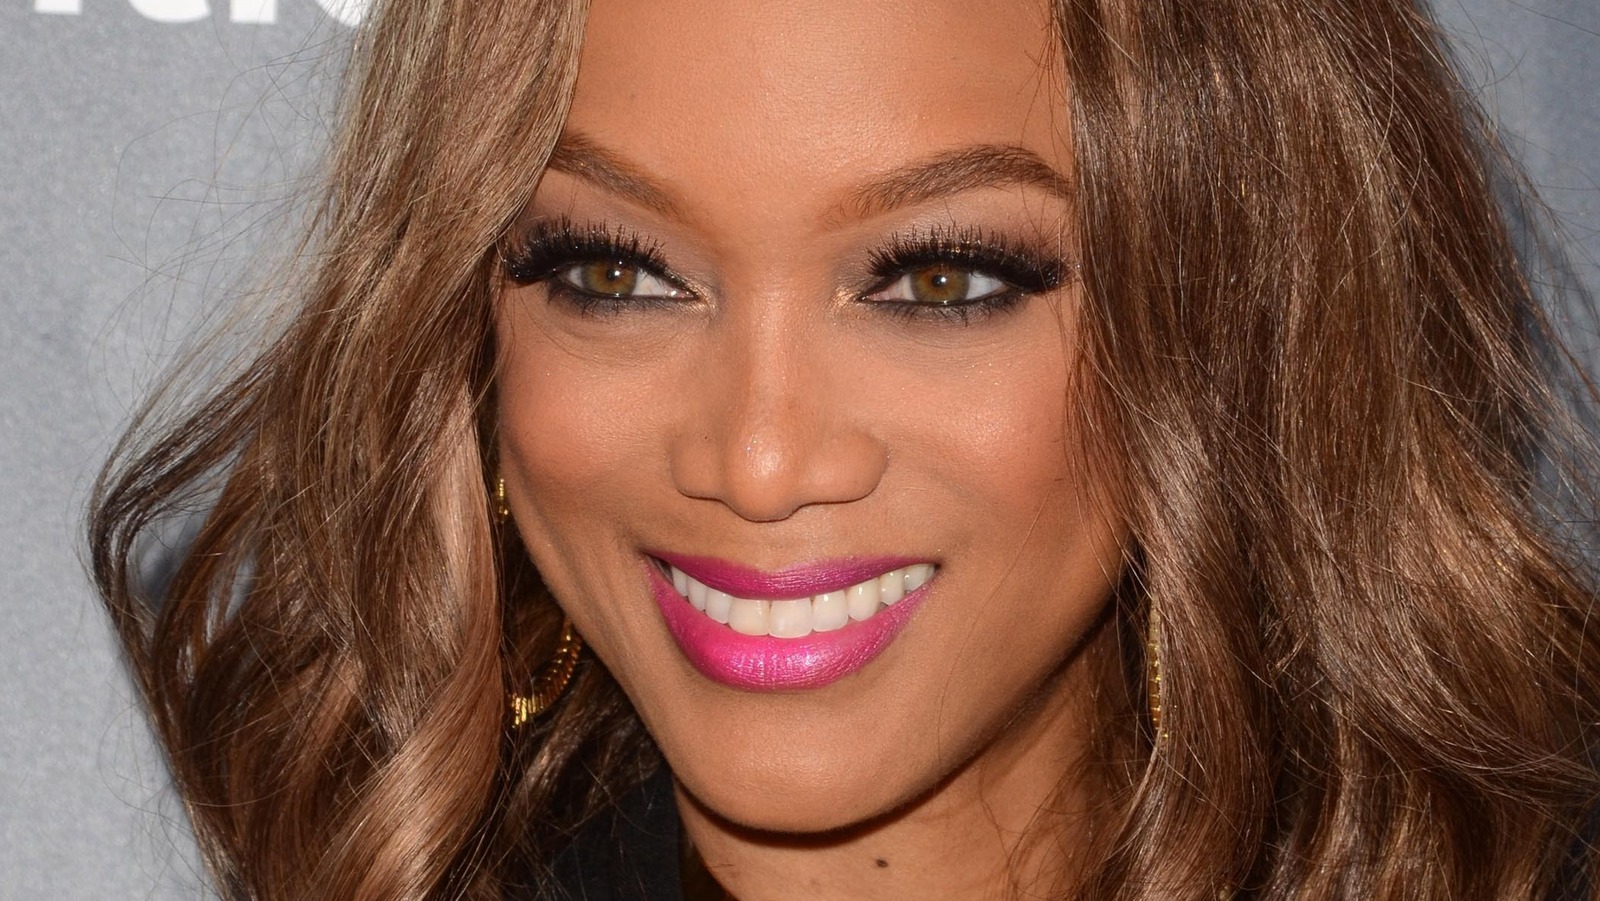 What Tyra Banks Really Looks Like Underneath All That Makeup